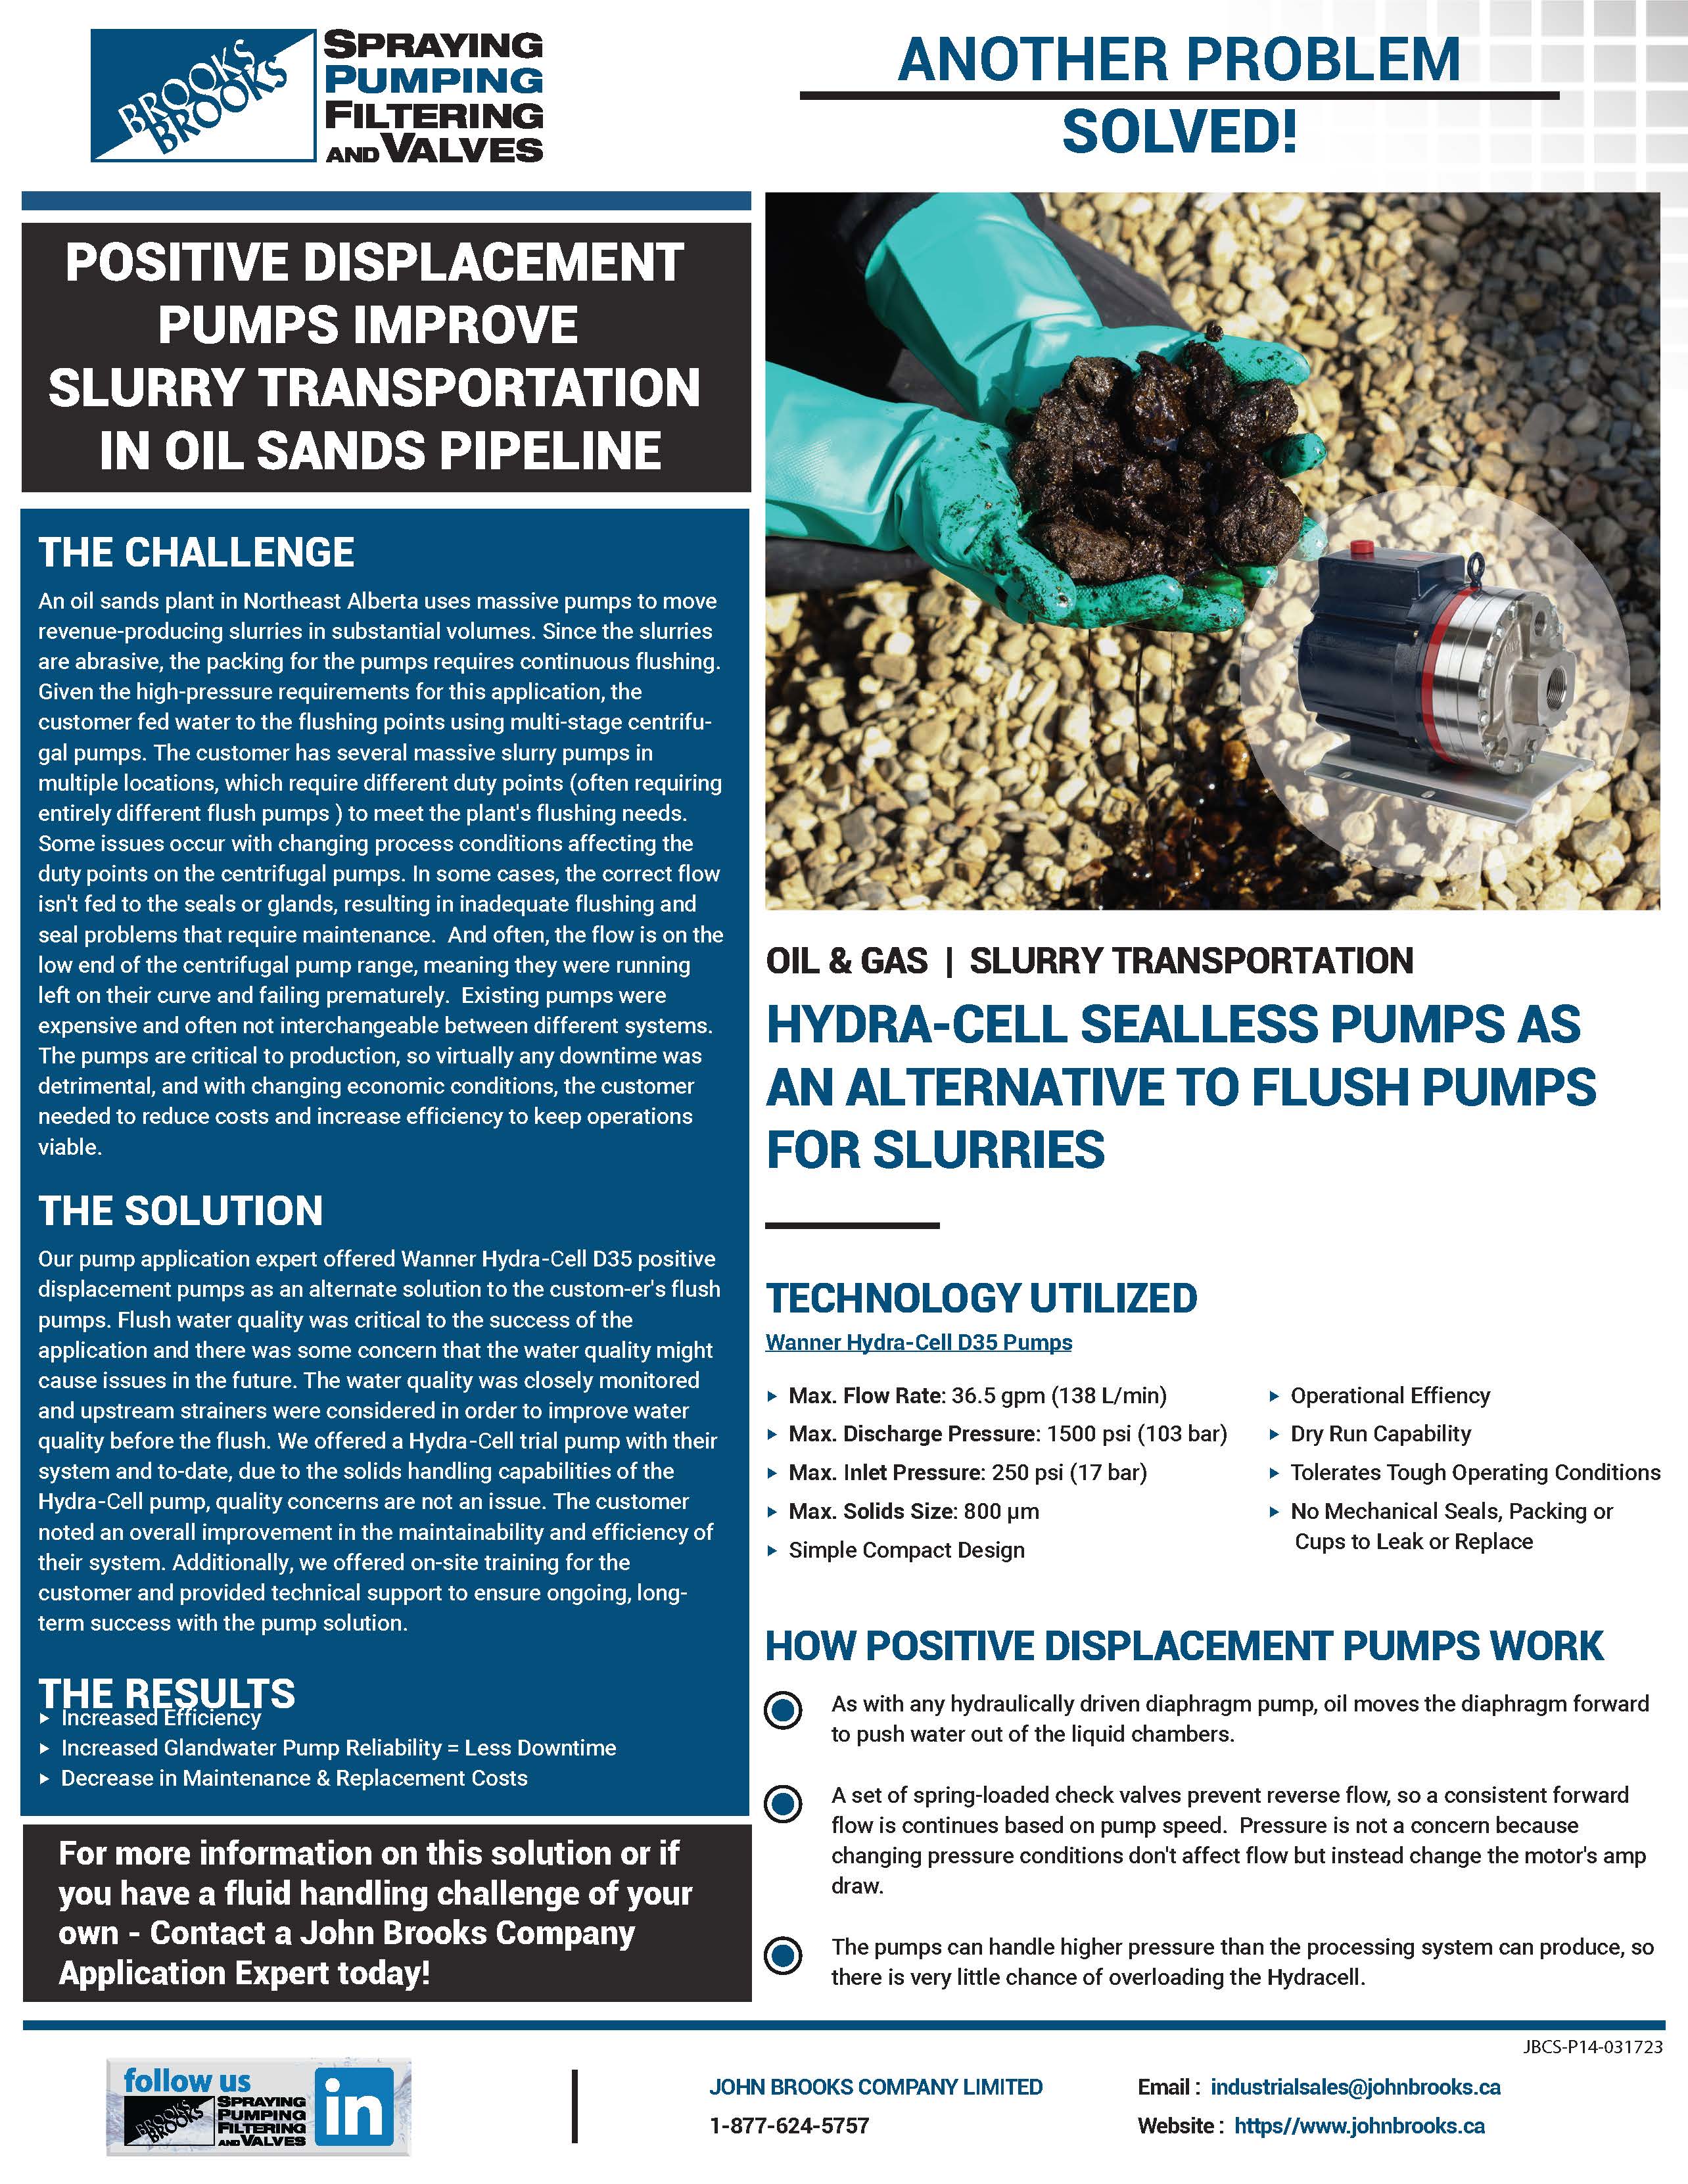 Hydra-Cell Positive Displacement Pumps Improve Slurry Transportation in Oil Sands Pipeline